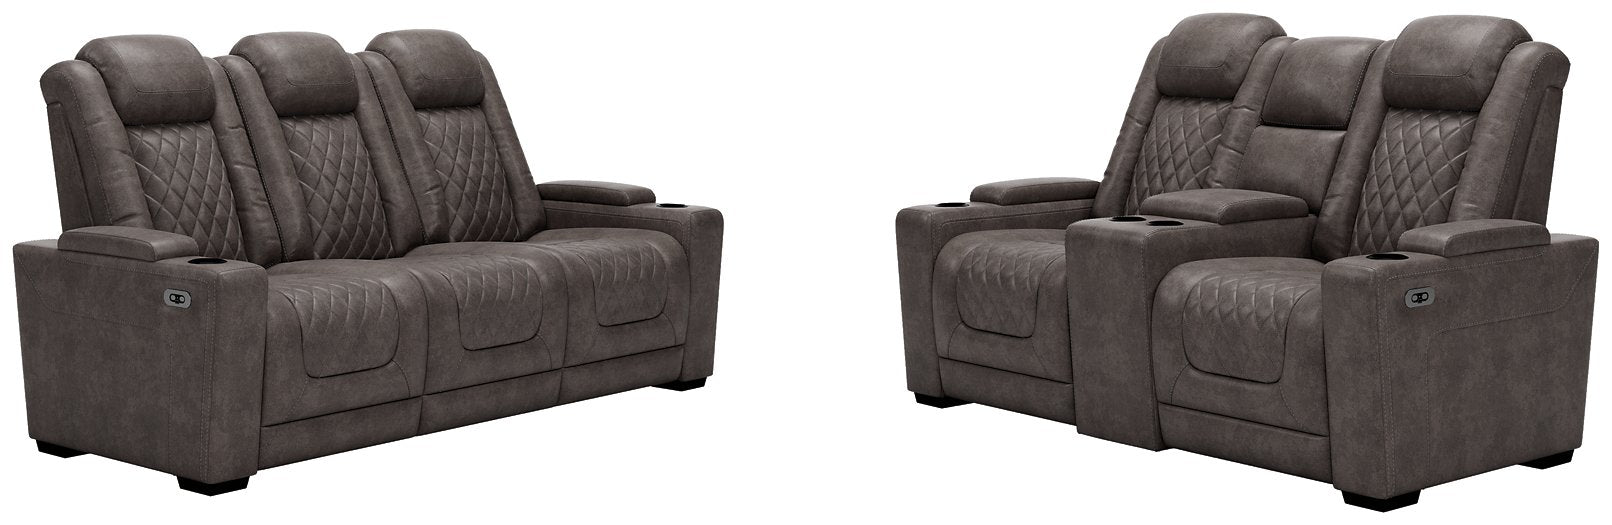 HyllMont Power Reclining Upholstery Package